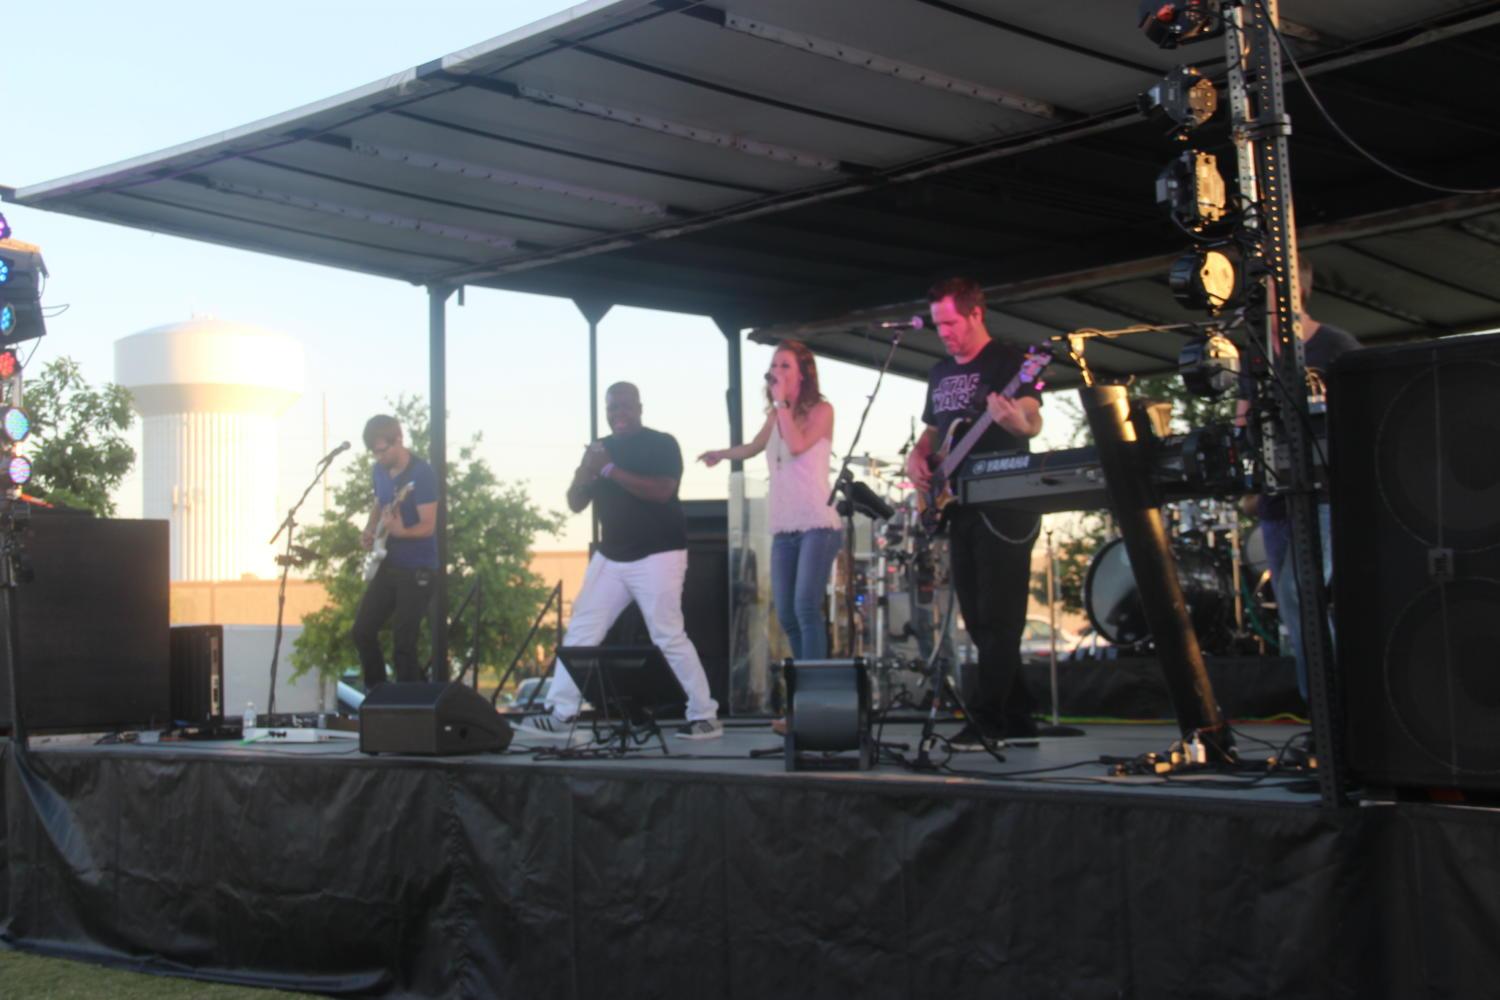 Last night, the band Time Machine sings covers of songs at the Coppell Concert on the Lawn in the Square at Old Town Coppell. Songs it performed ranged from “Uptown Funk” by Bruno Mars to “La Vida es un Carnaval” by Celia Cruz.